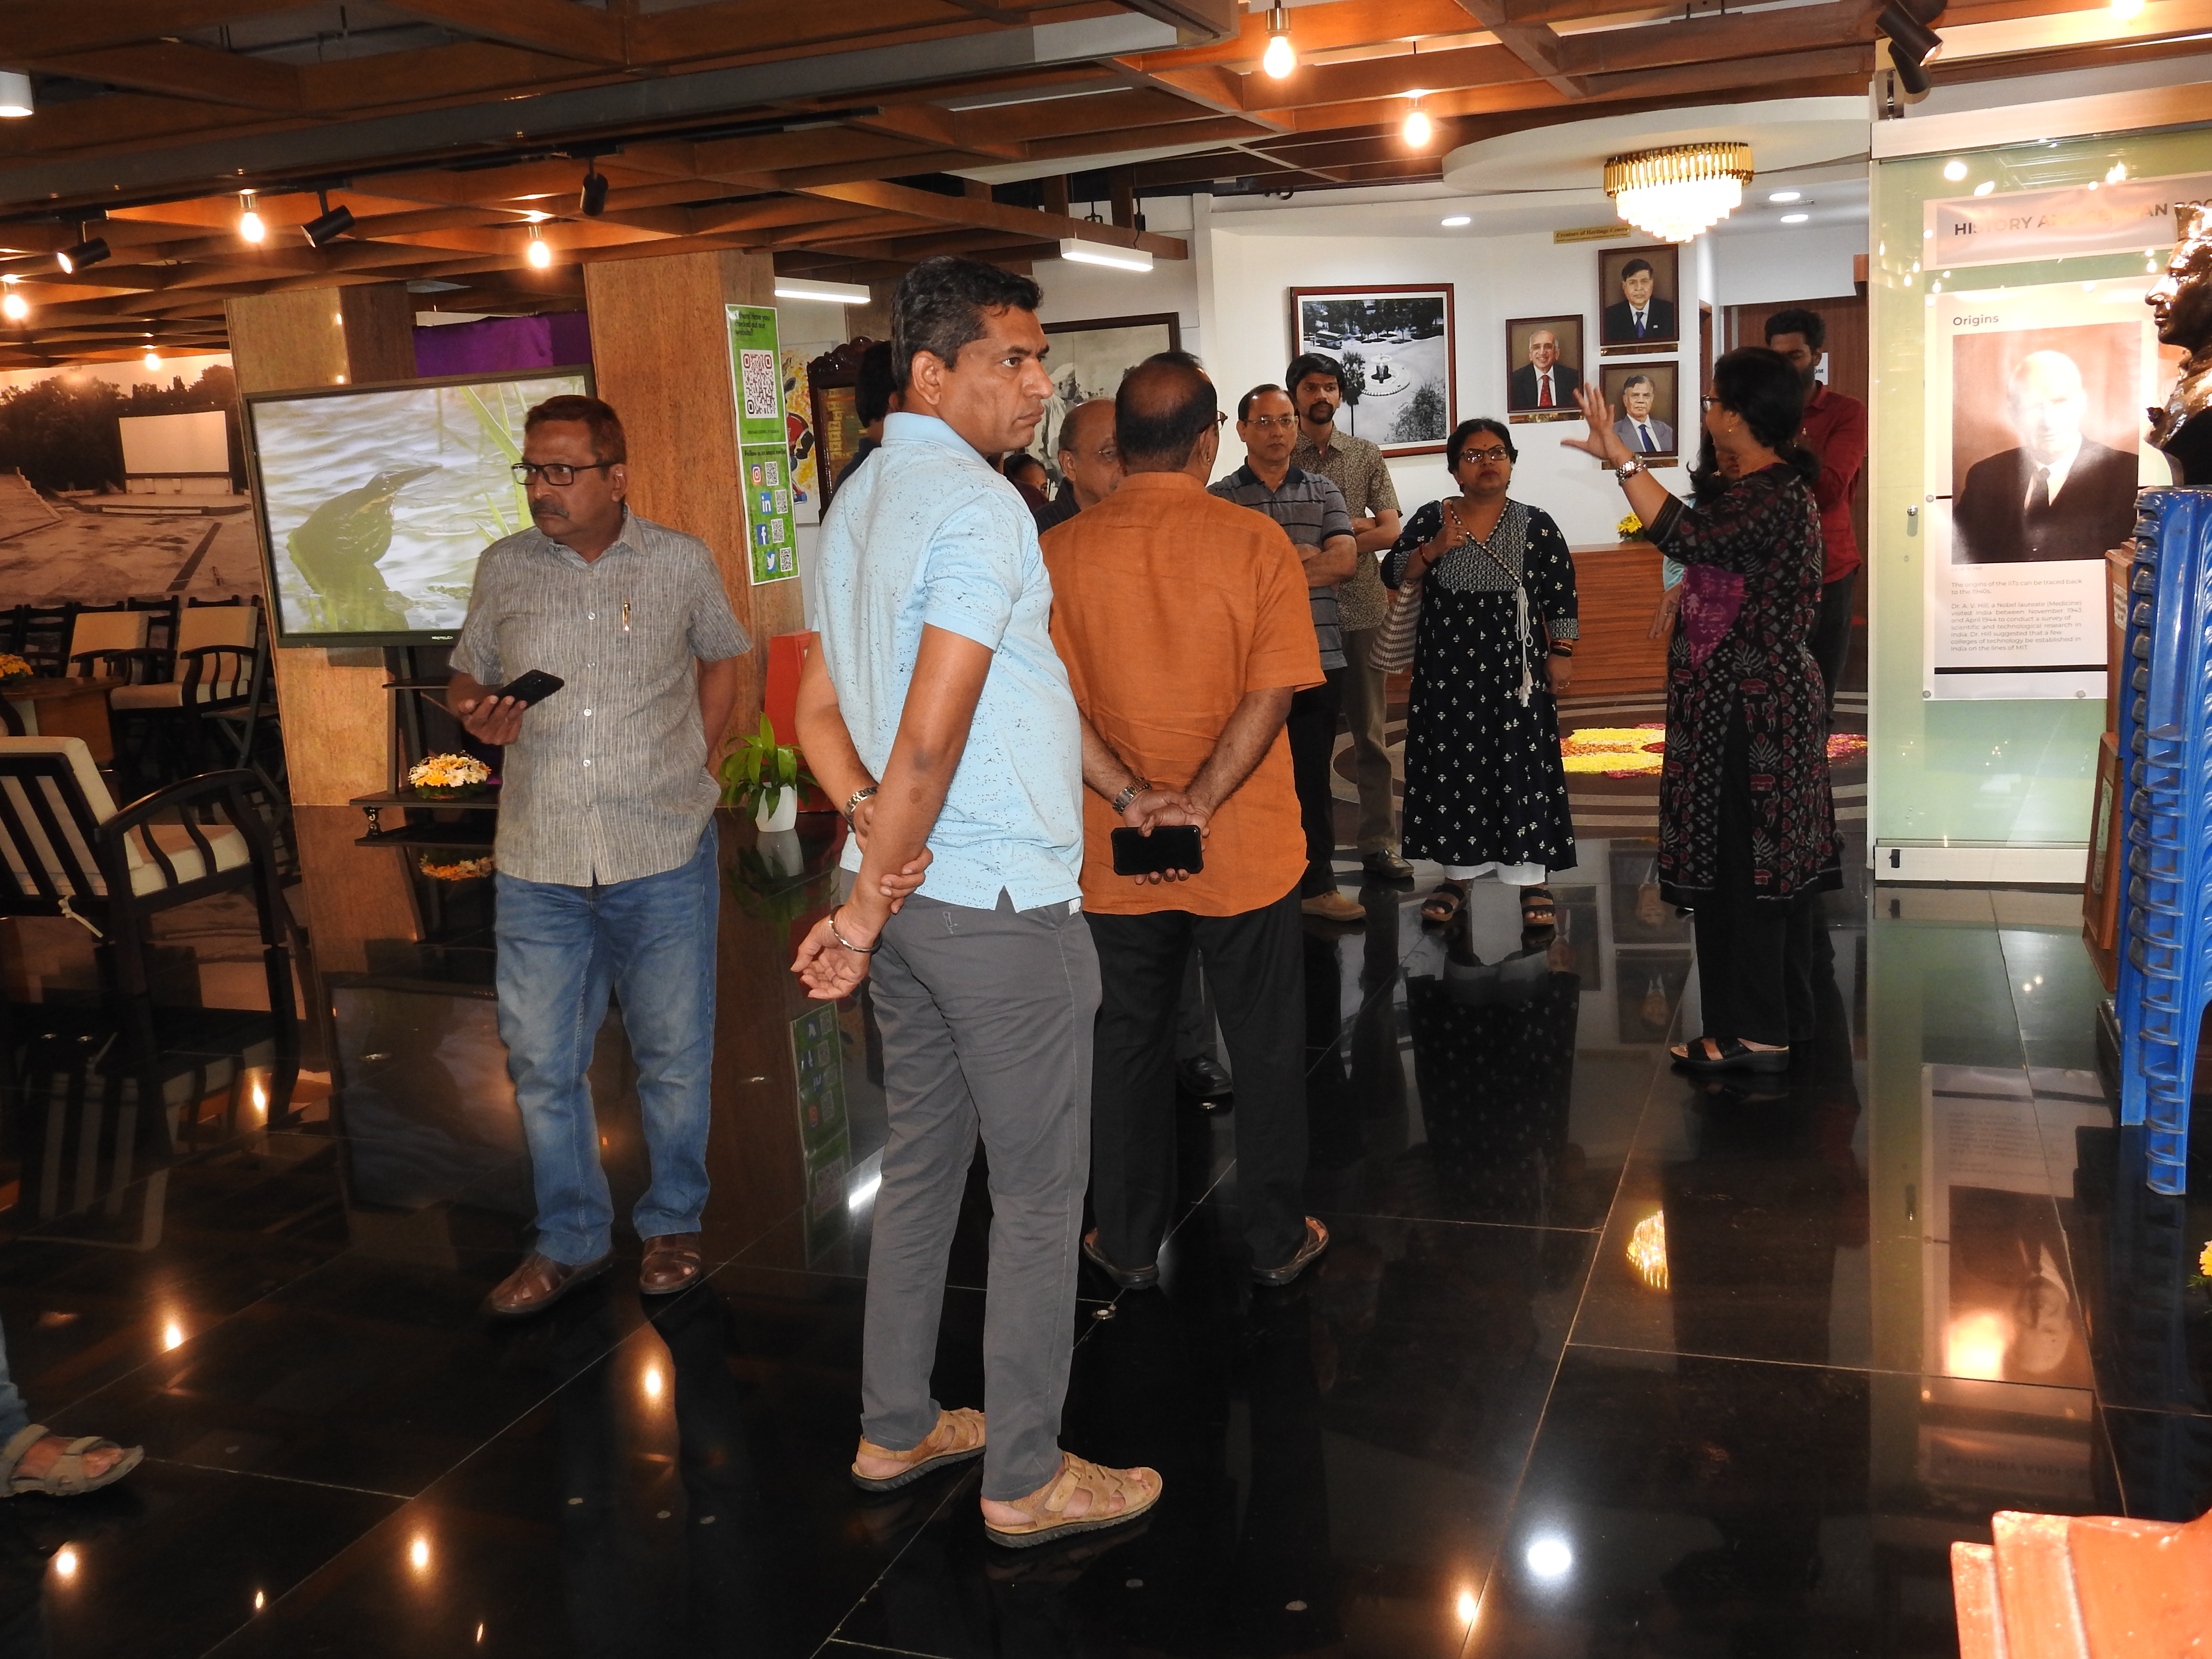 Ms. Mamata Dash (Senior Project Officer, Heritage Centre) explains about the exhibition to the visitors  